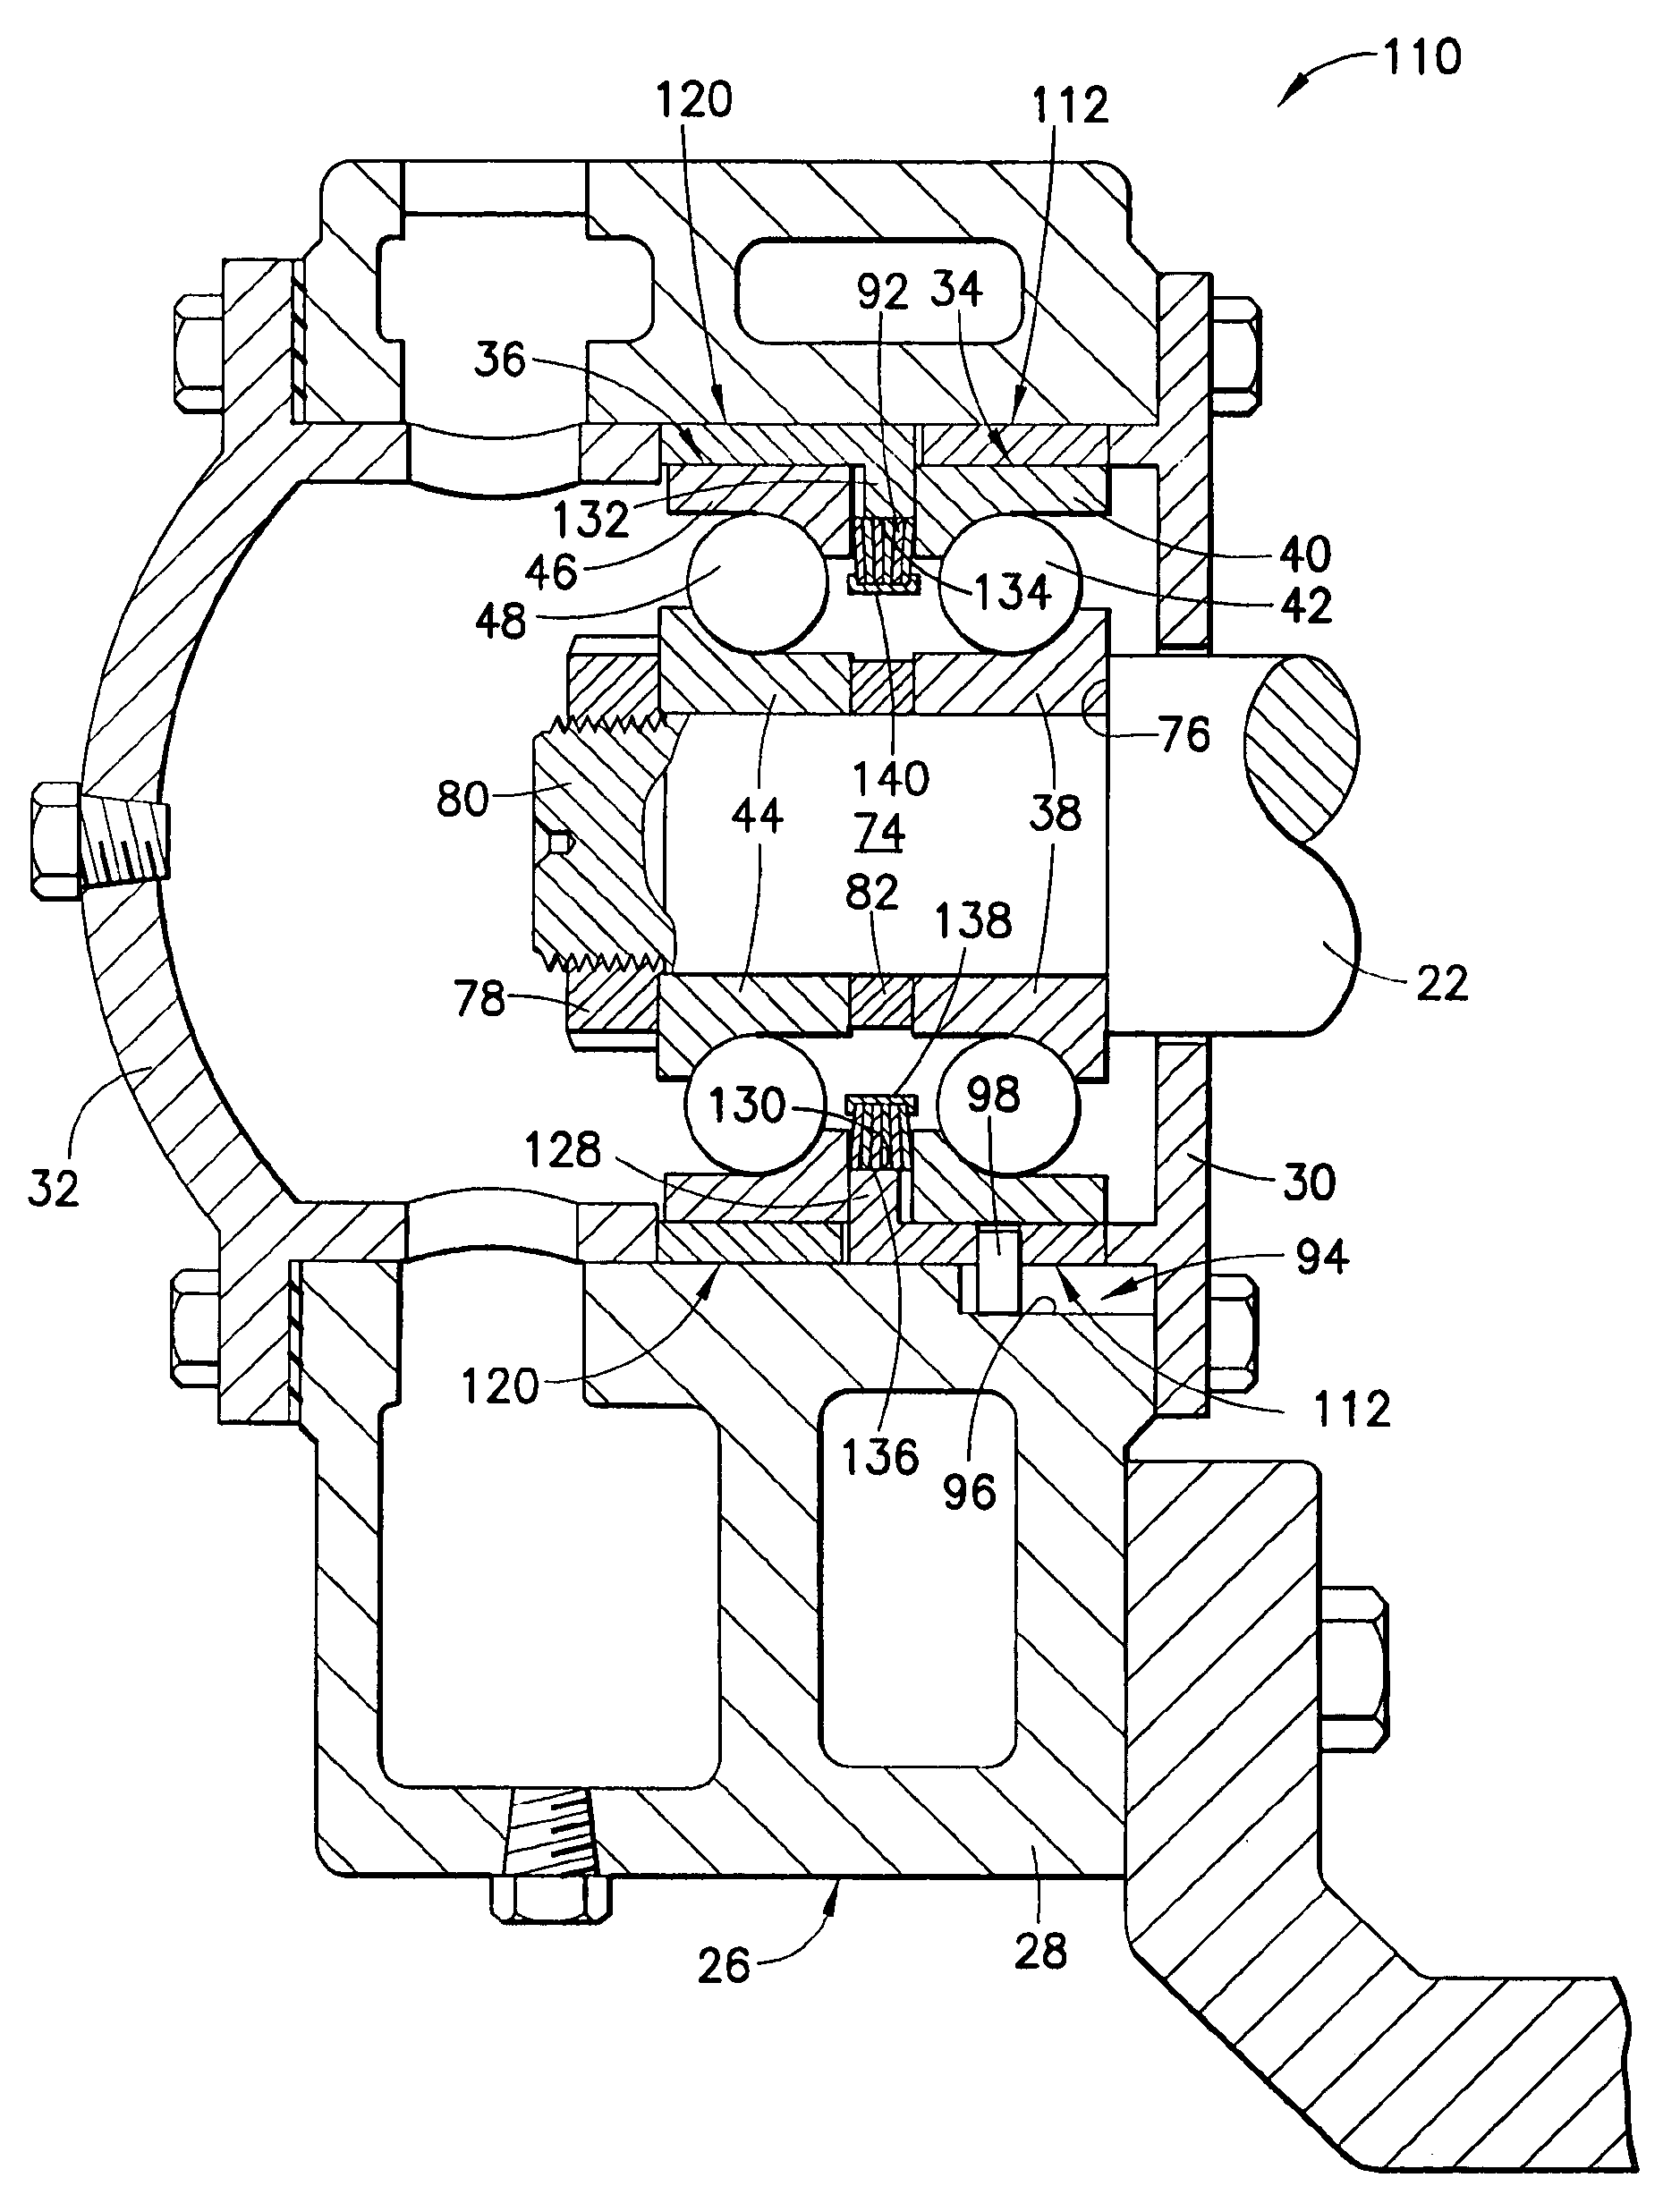 Bearing preload cage assembly